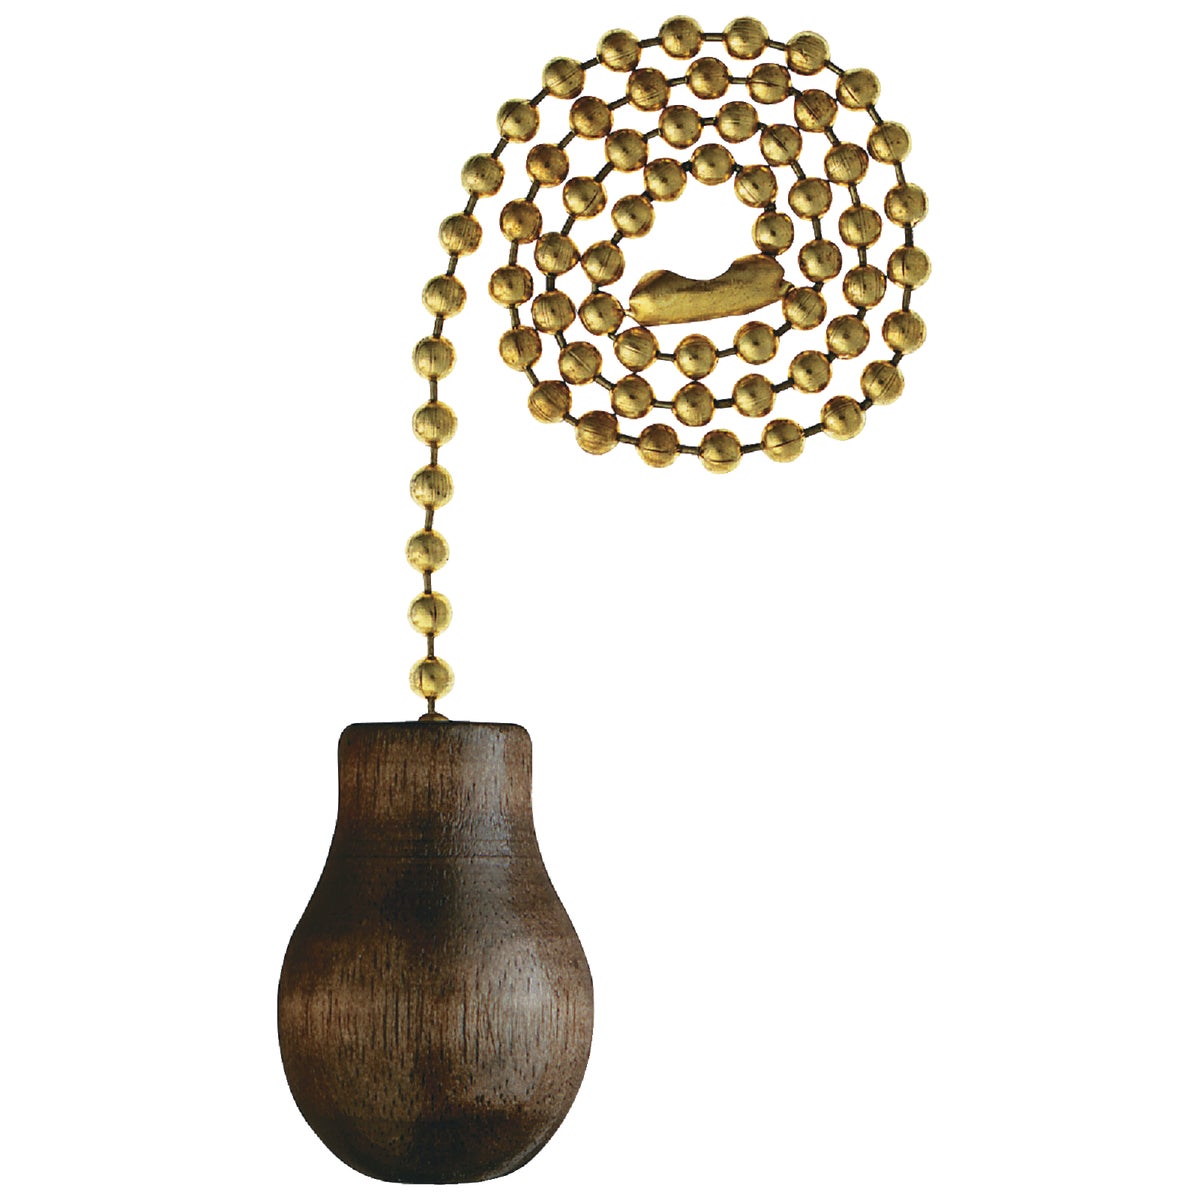 Item 514527, 12-inch polished brass bead pull chain with wooden knob.